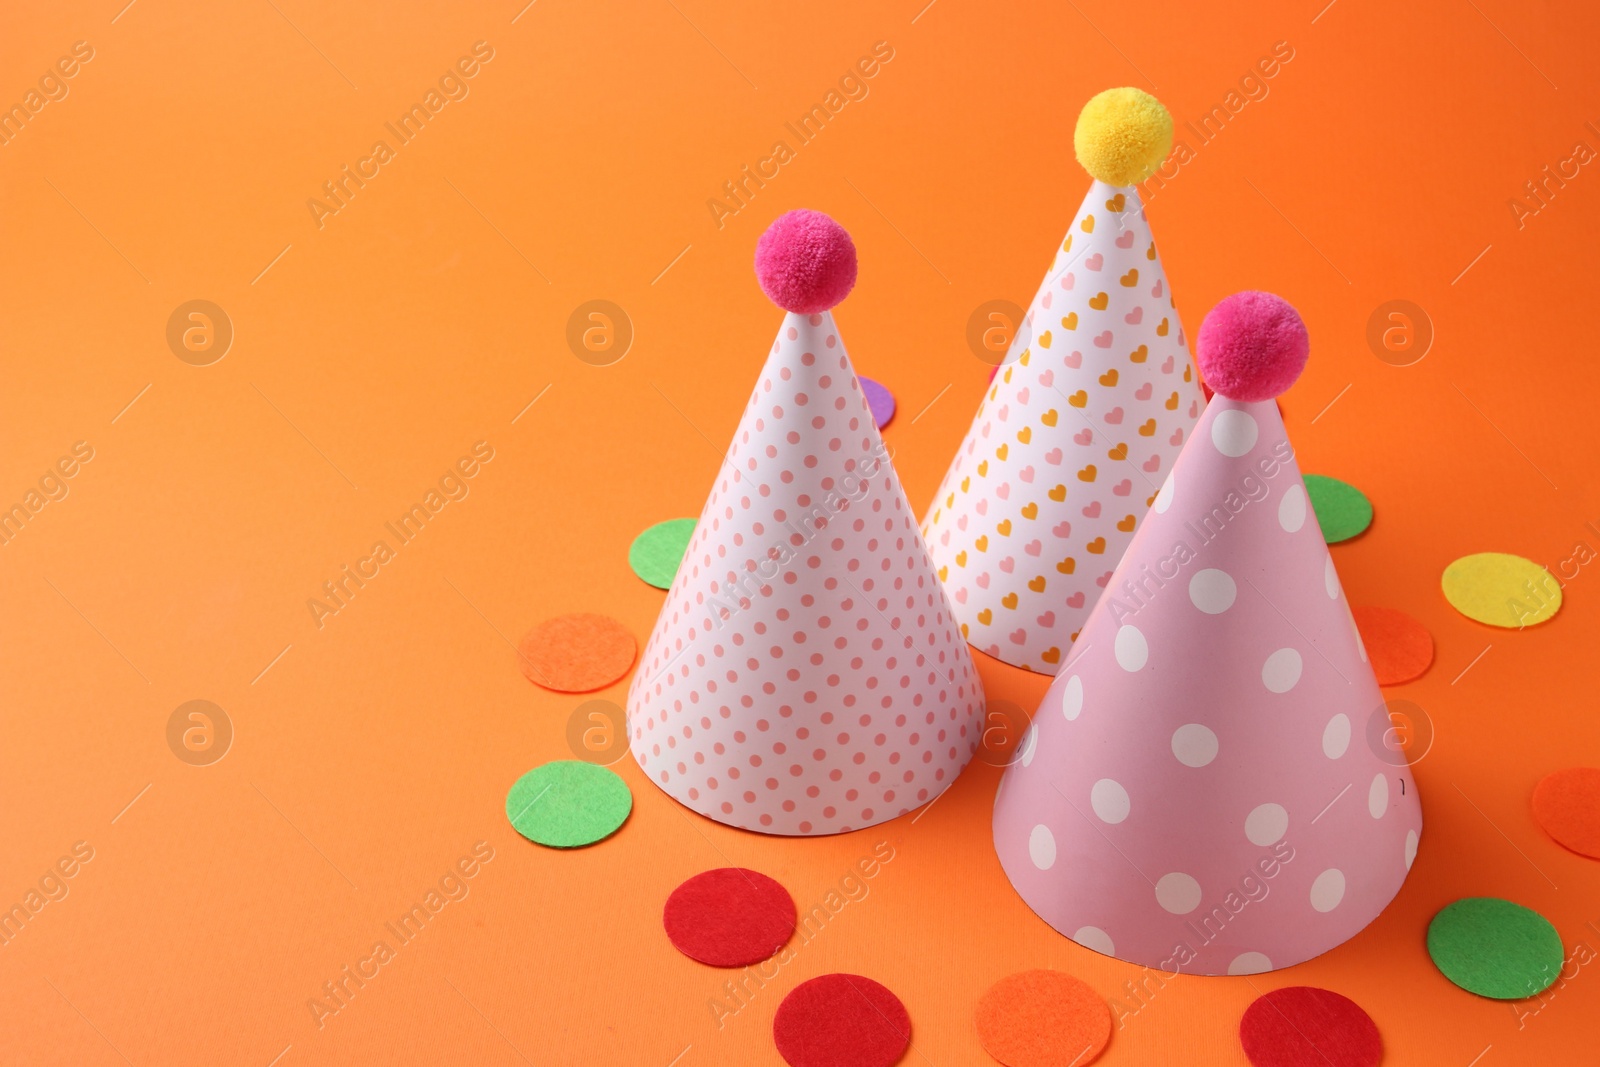 Photo of Party hats and colorful confetti on orange background. Space for text